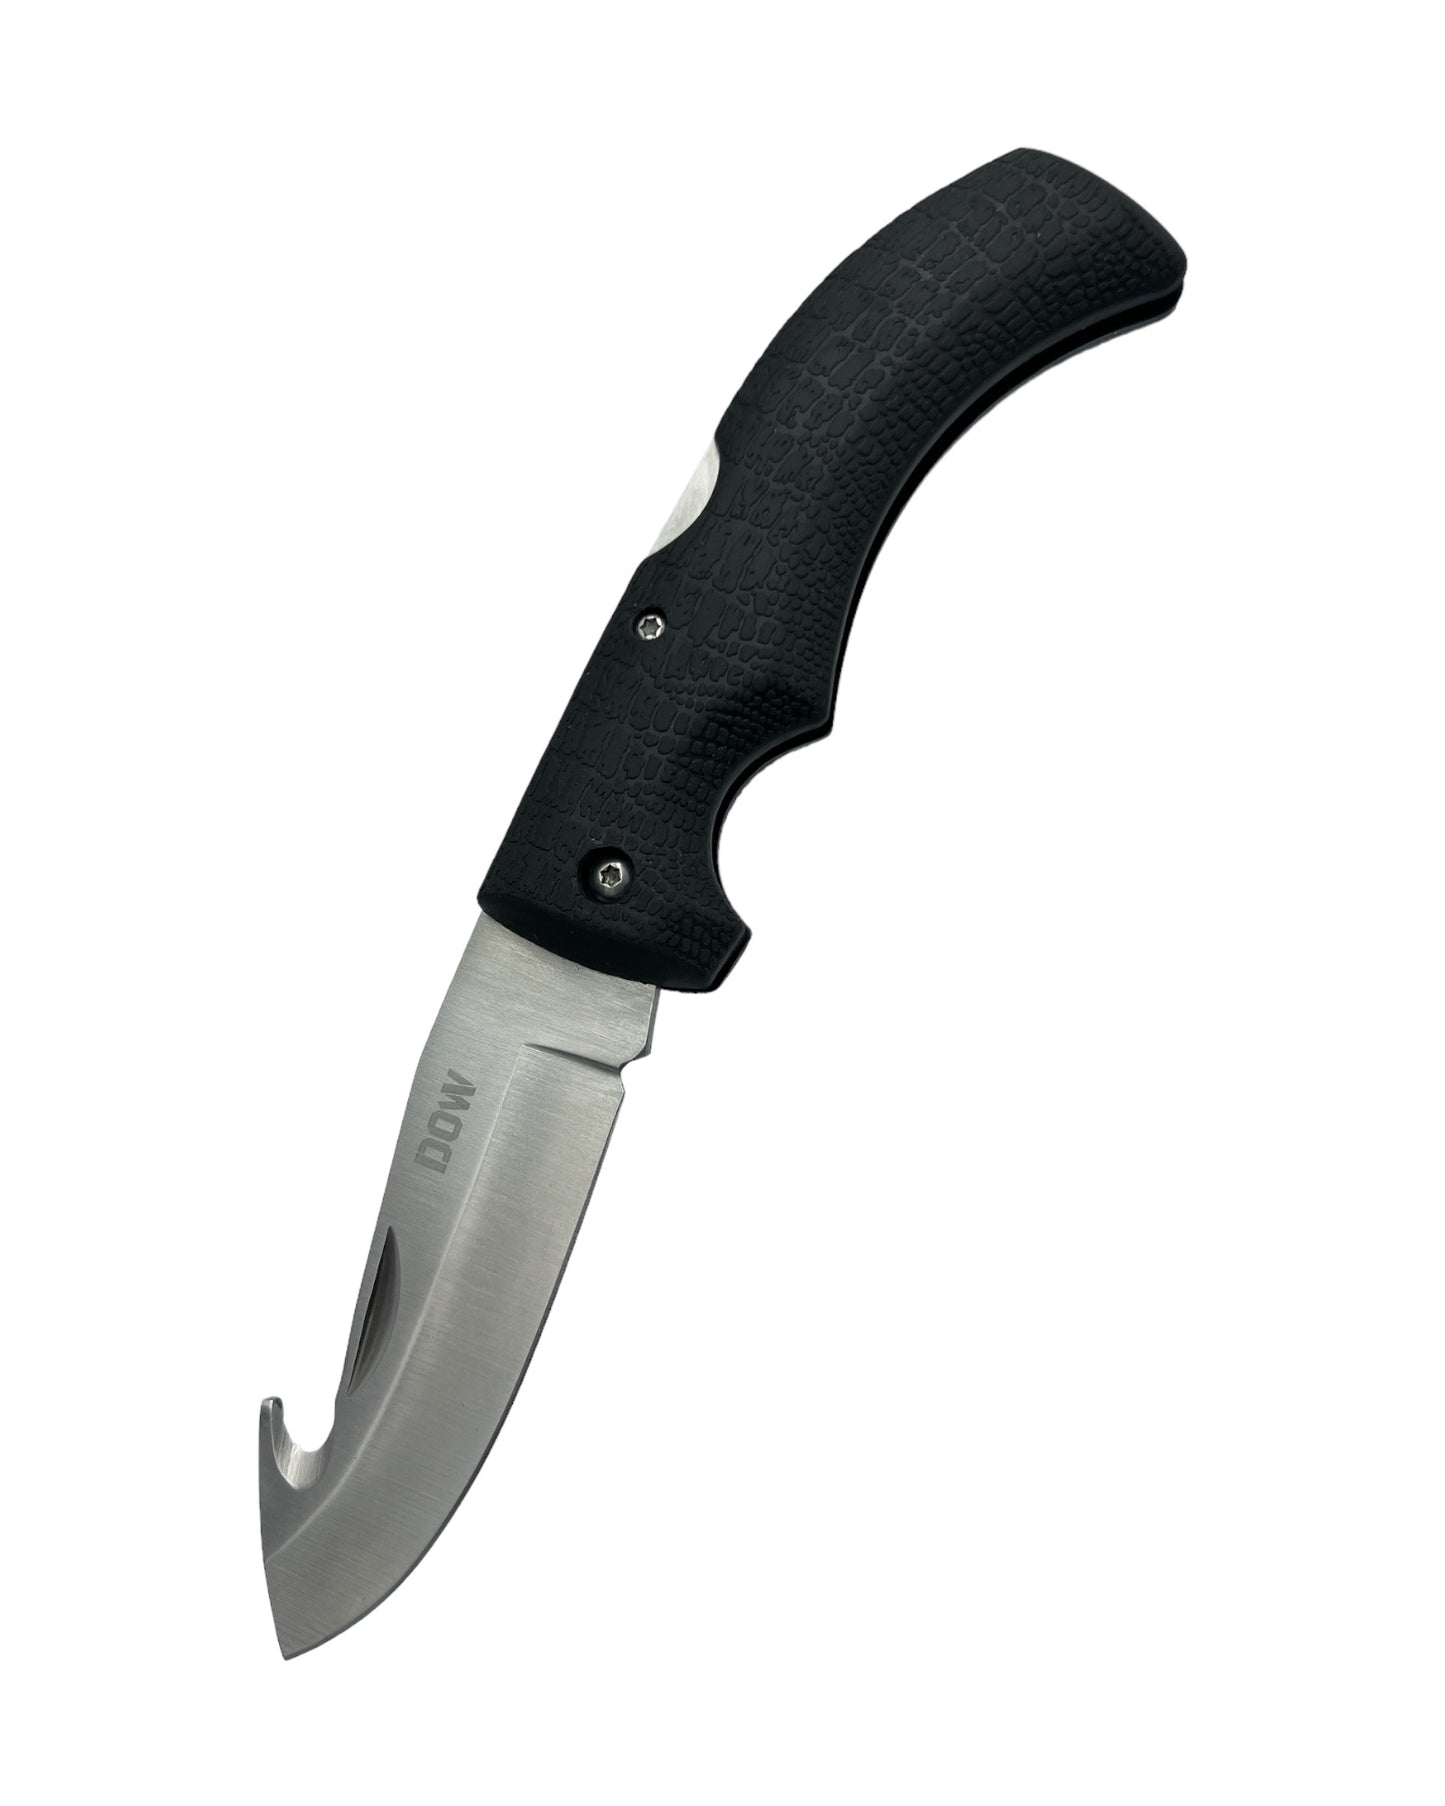 Hook Blade Knife with Rubber Handle - 3.5inch (9cm) Blade